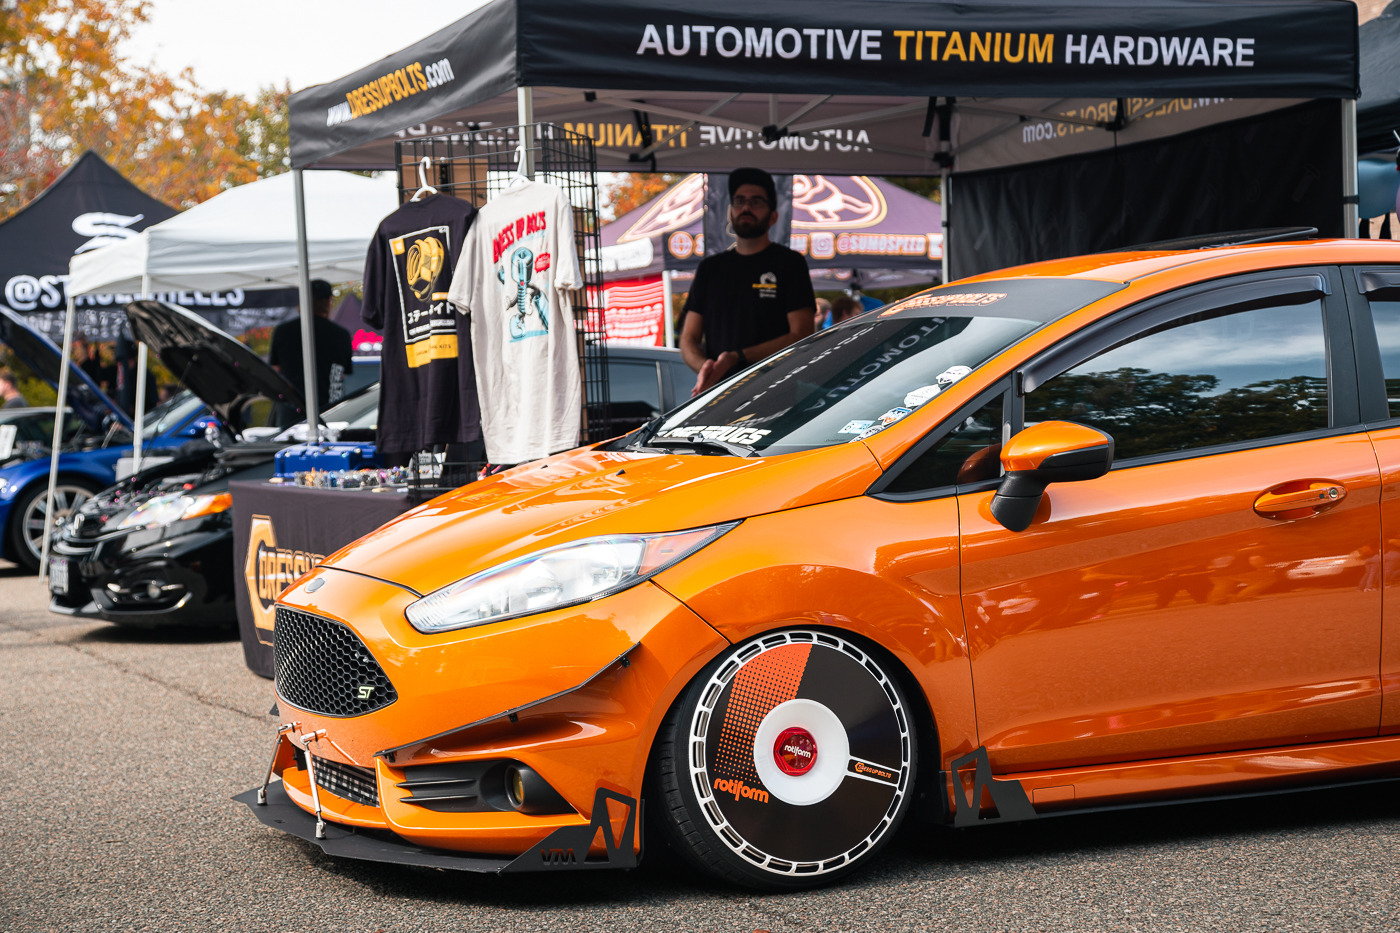 The owner of this Fiesta ST has threatened to turn it into more functional build. I support it!